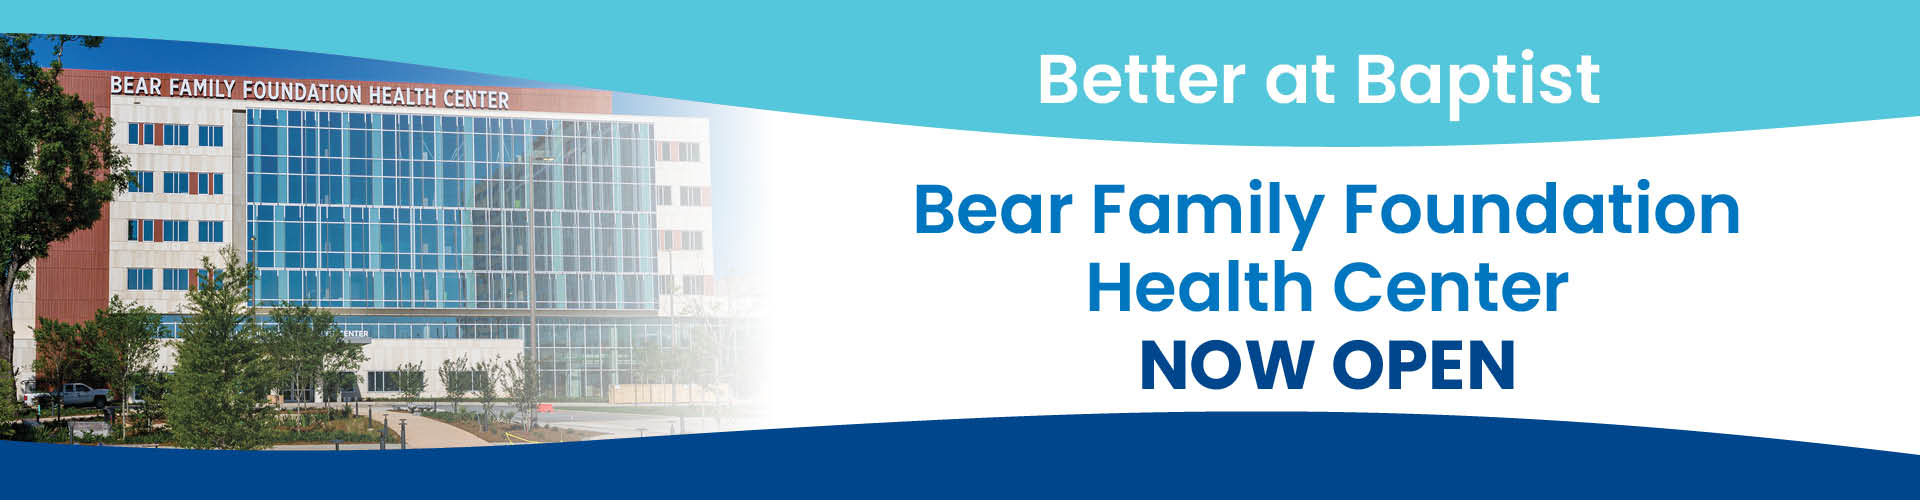 Better at Baptist - Bear Family Foundation Health Center is NOW OPEN